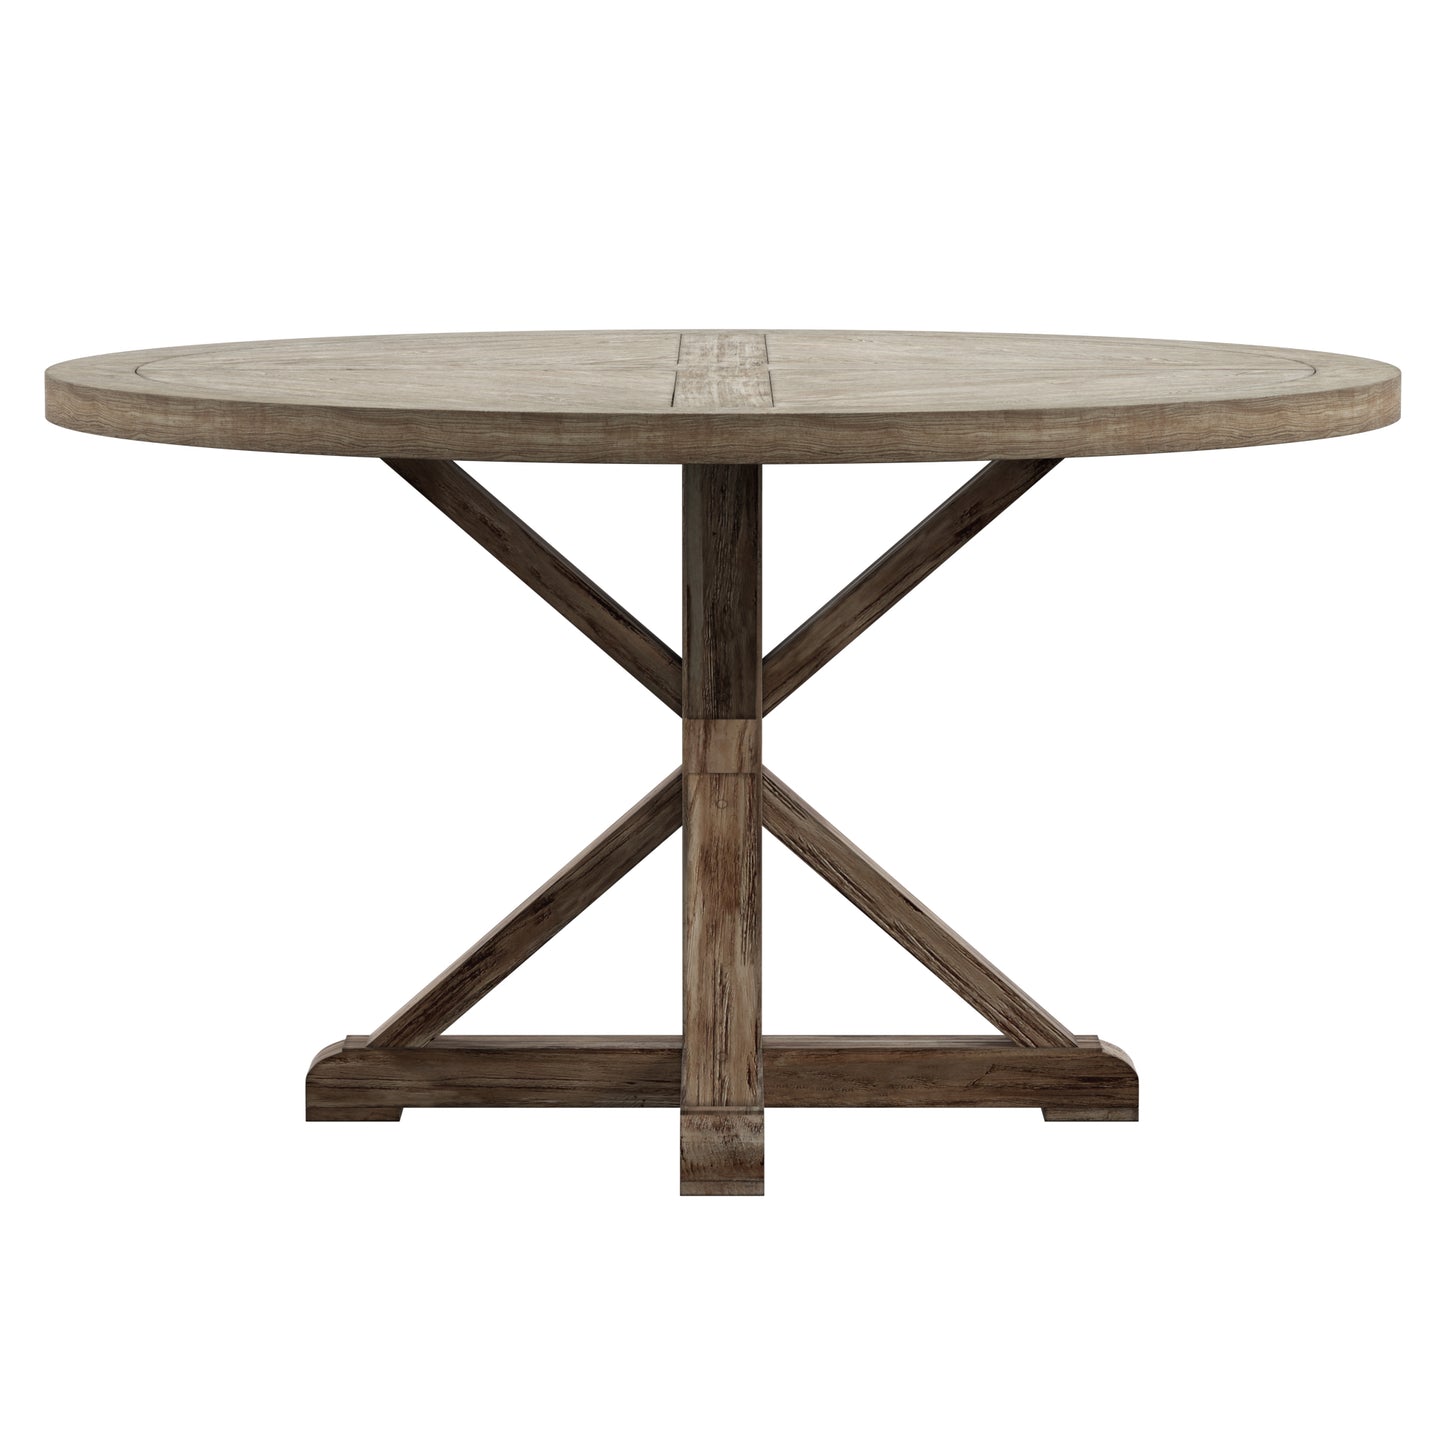 Rustic X-Base Round Pine Wood Dining Table - Antique Grey Finish, 54-inch